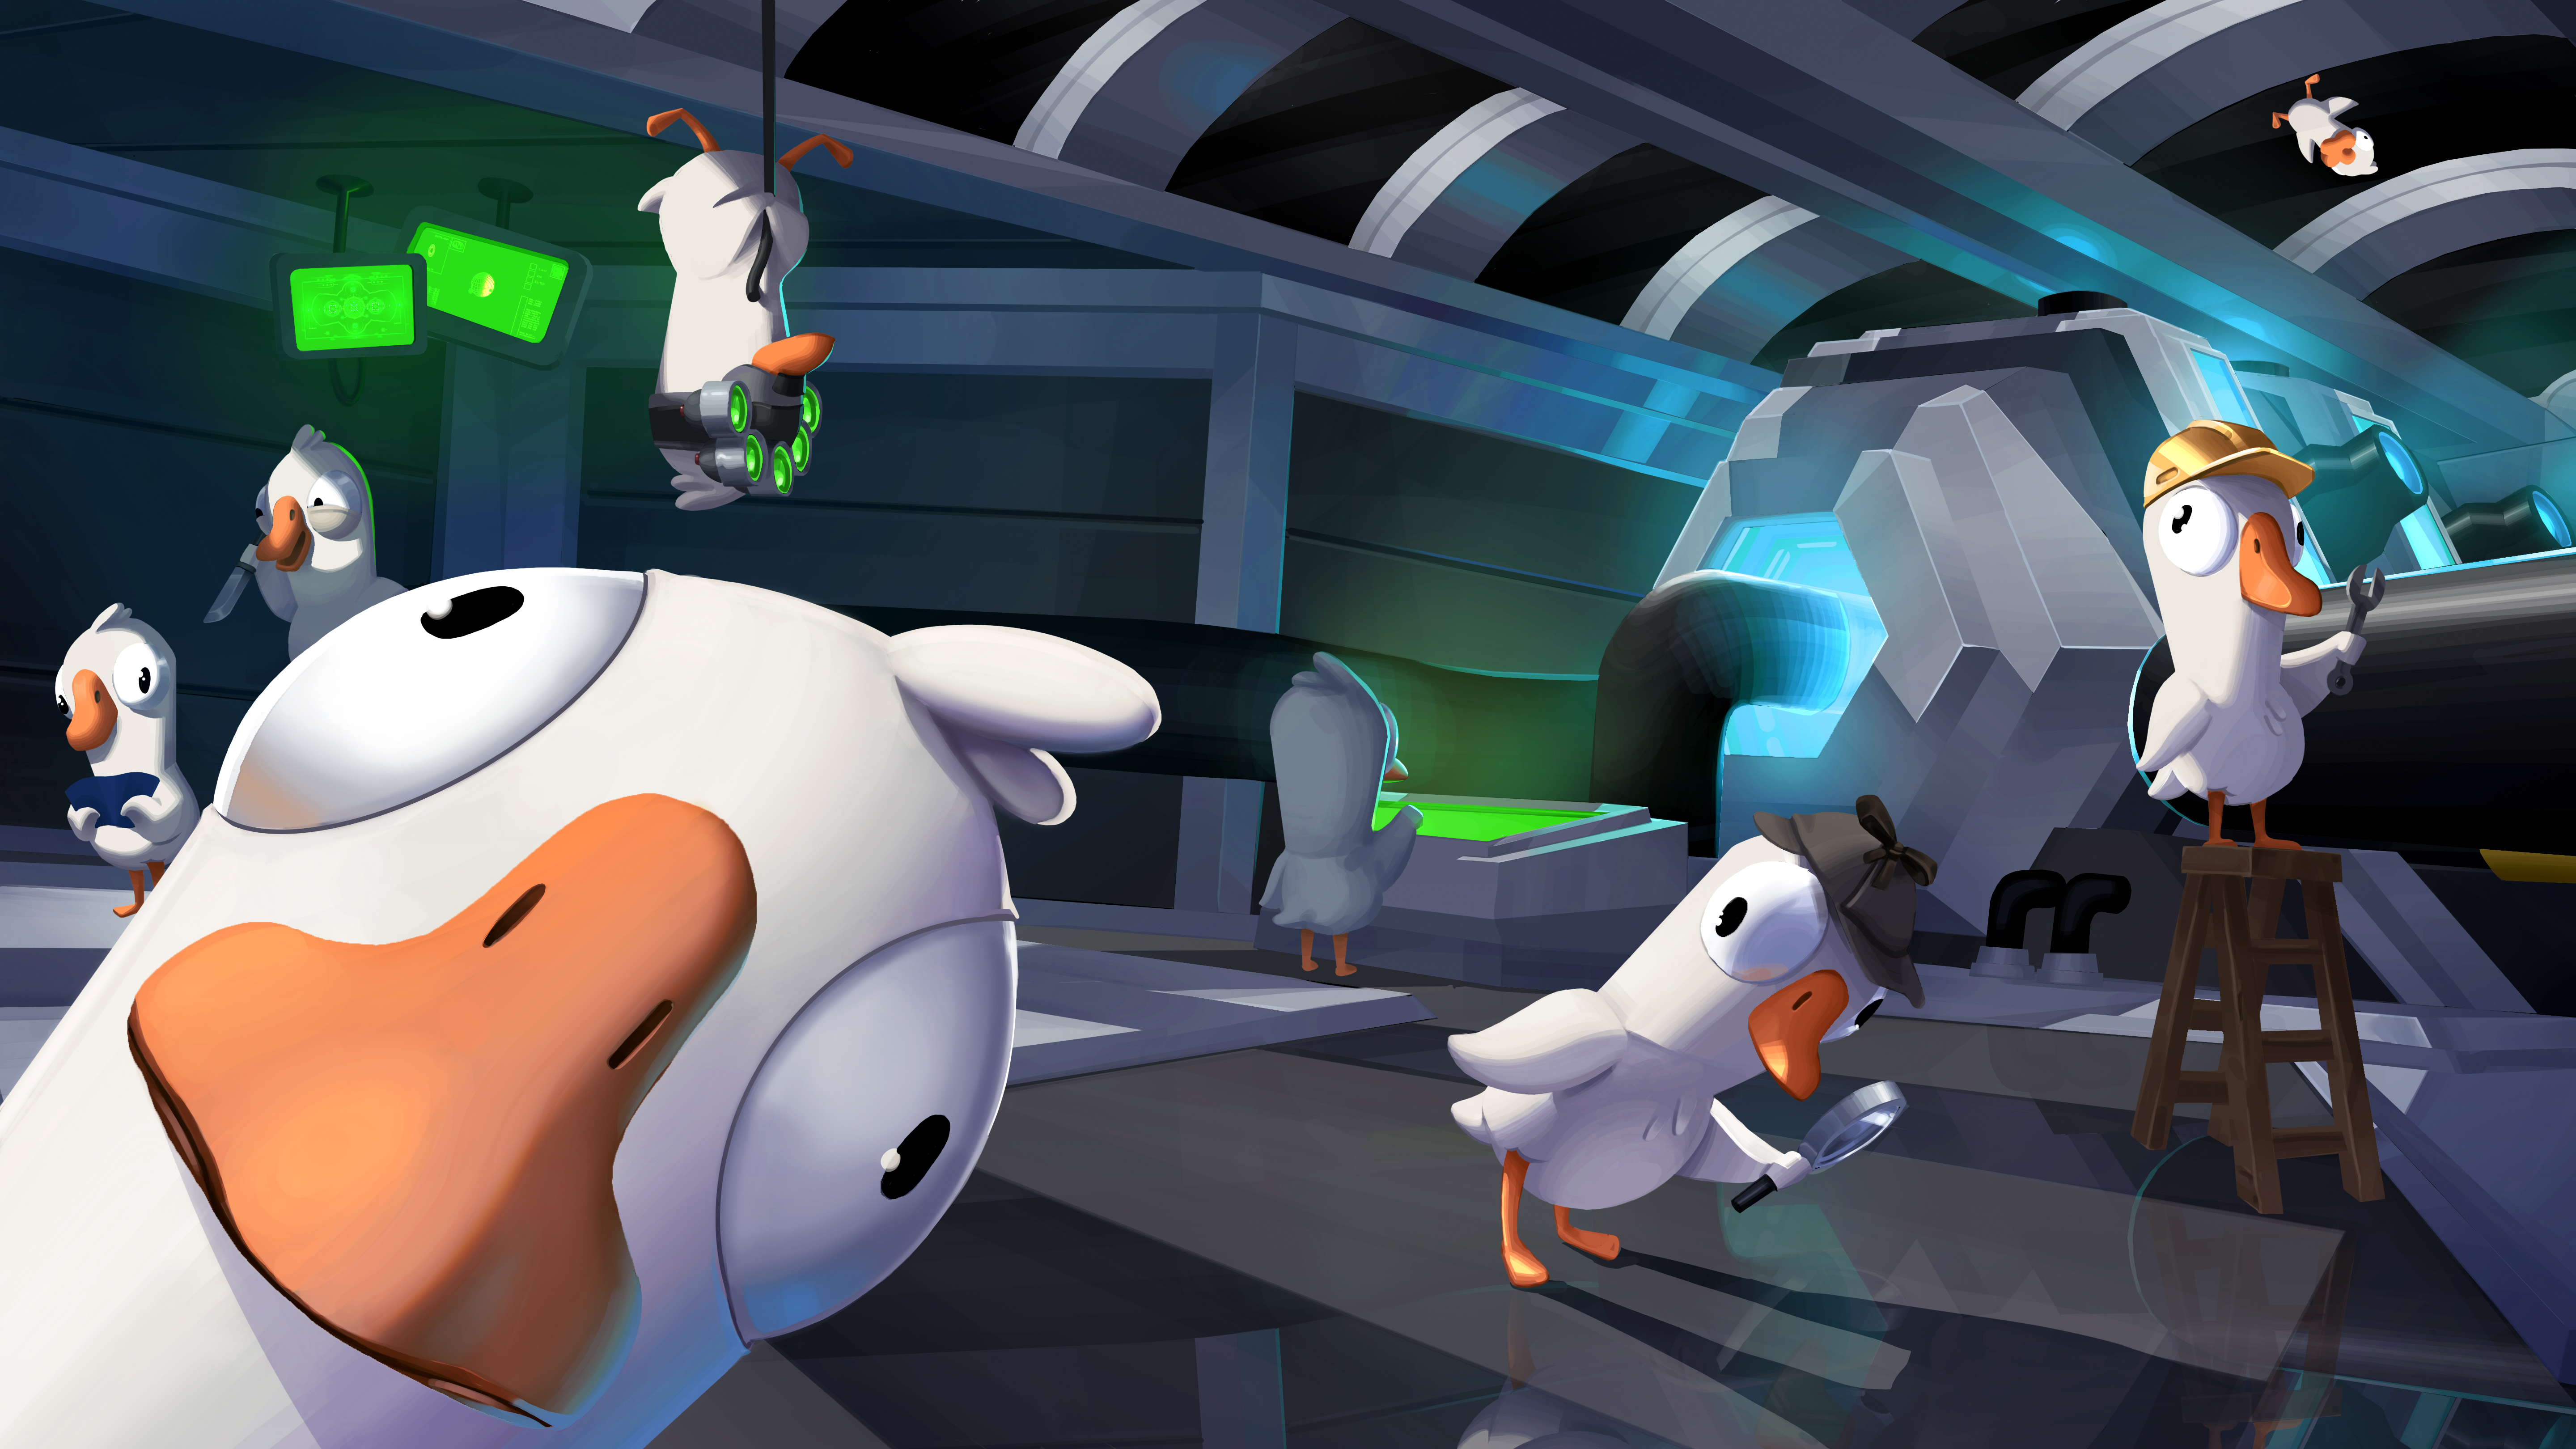 HD desktop wallpaper featuring characters from the game Goose Goose Duck in a dynamic spaceship setting.